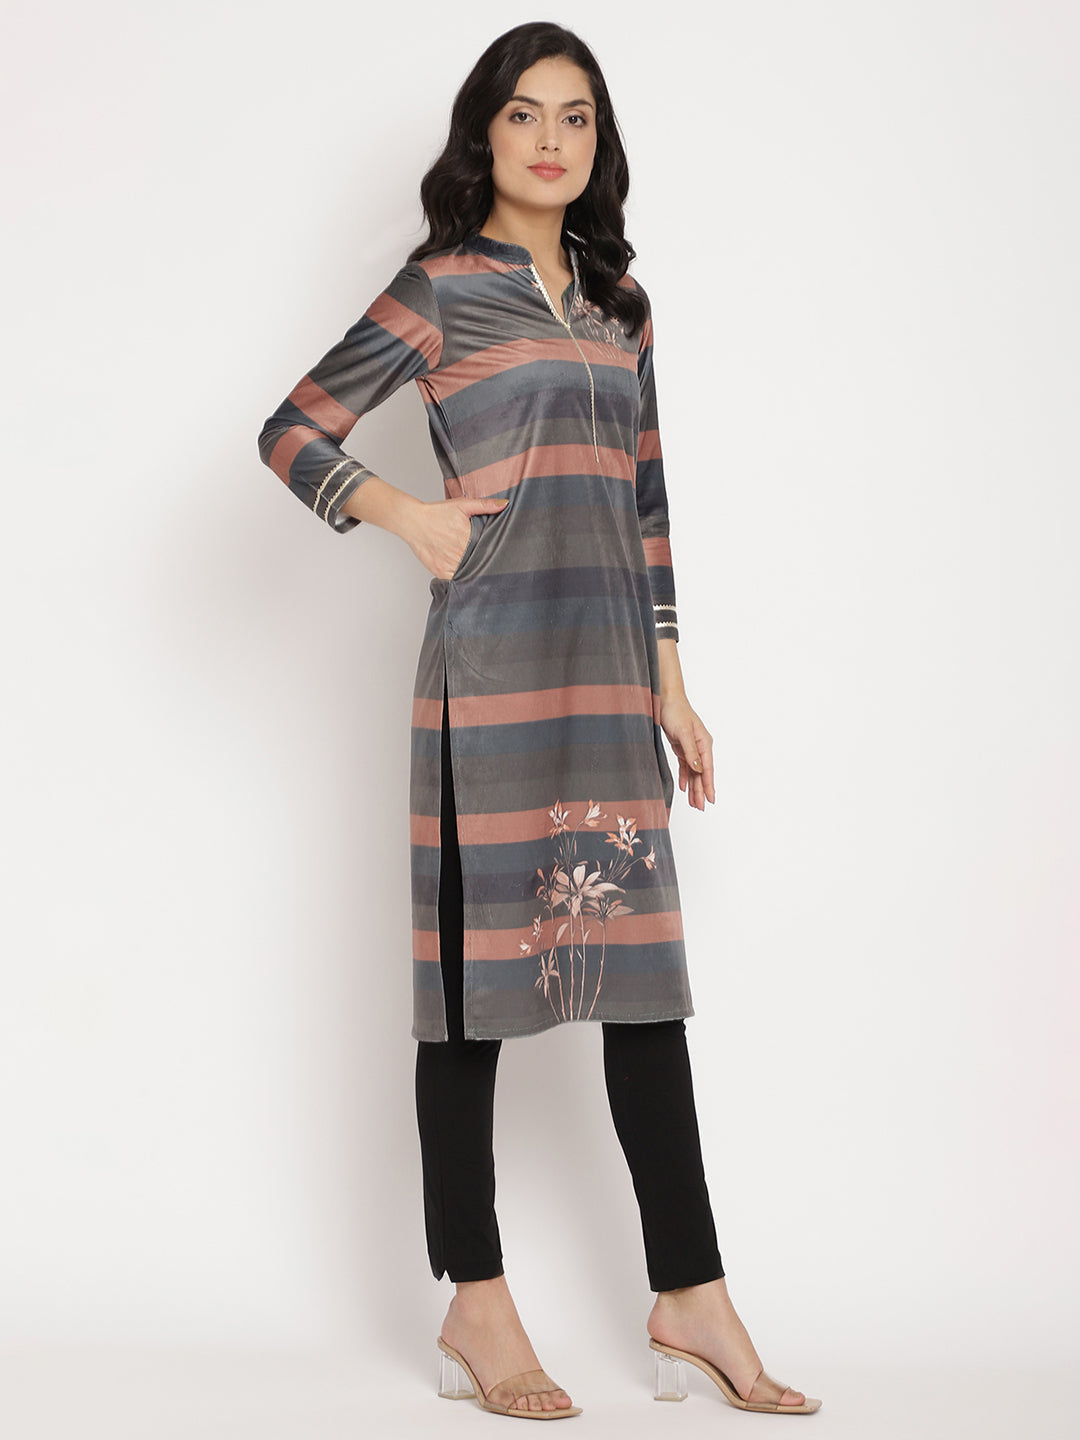 Buy Classy Digital Printed Rayon Women's Kurtis Online at Low prices in  India on Winsant, India fastest online shopping website… | Indian tunic  tops, Kurti, Fashion